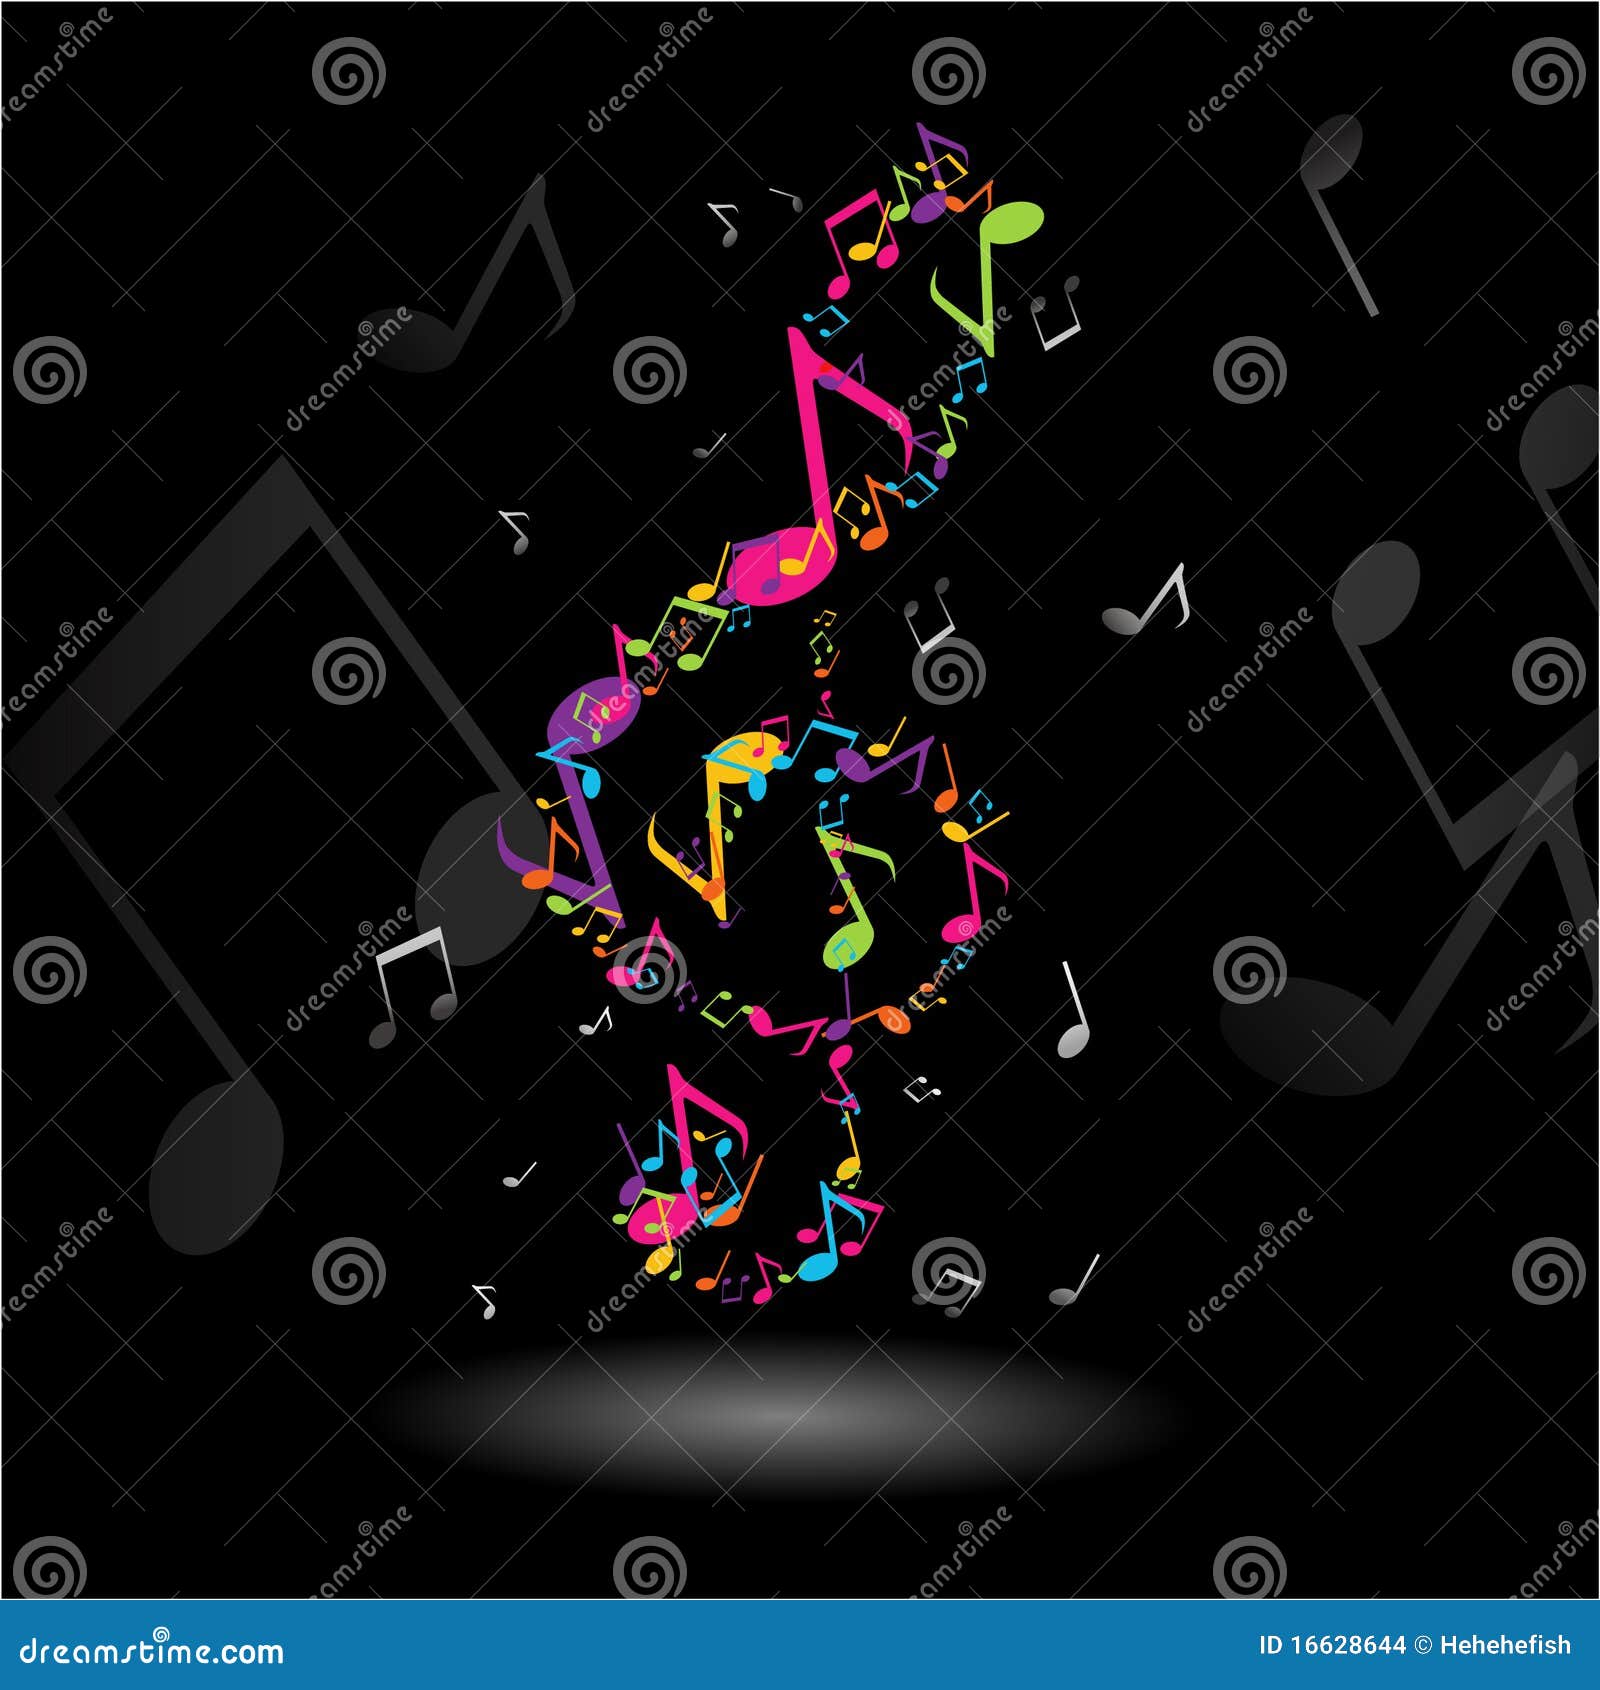 treble clef music notes 